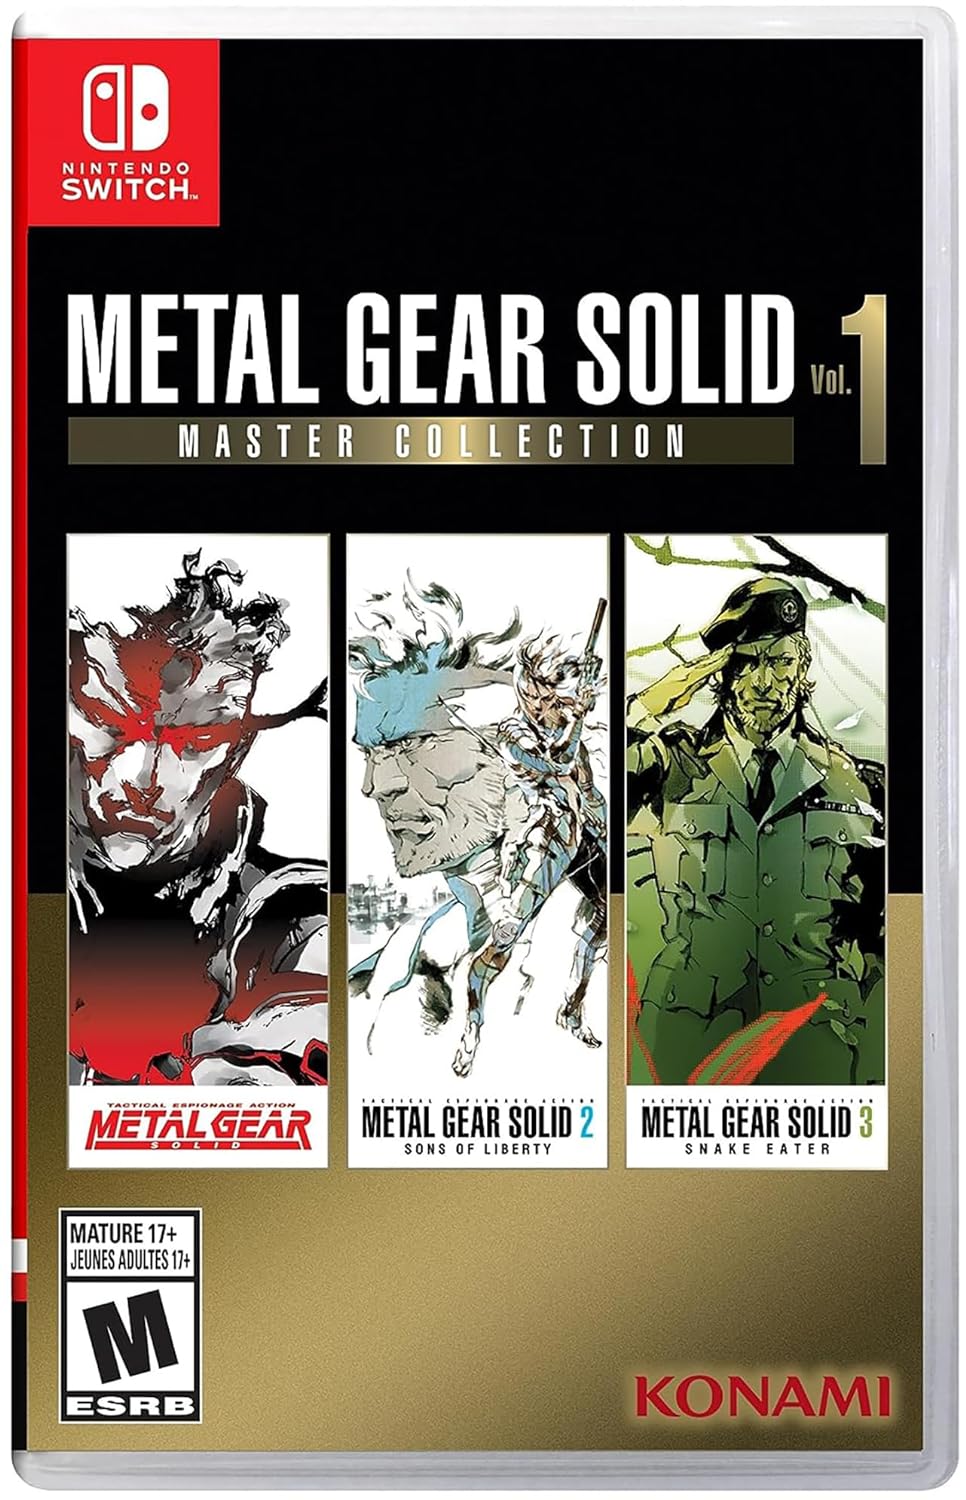 $30: Metal Gear Solid: Master Collection Vol.1 (Nintendo Switch, XSX) @ Amazon